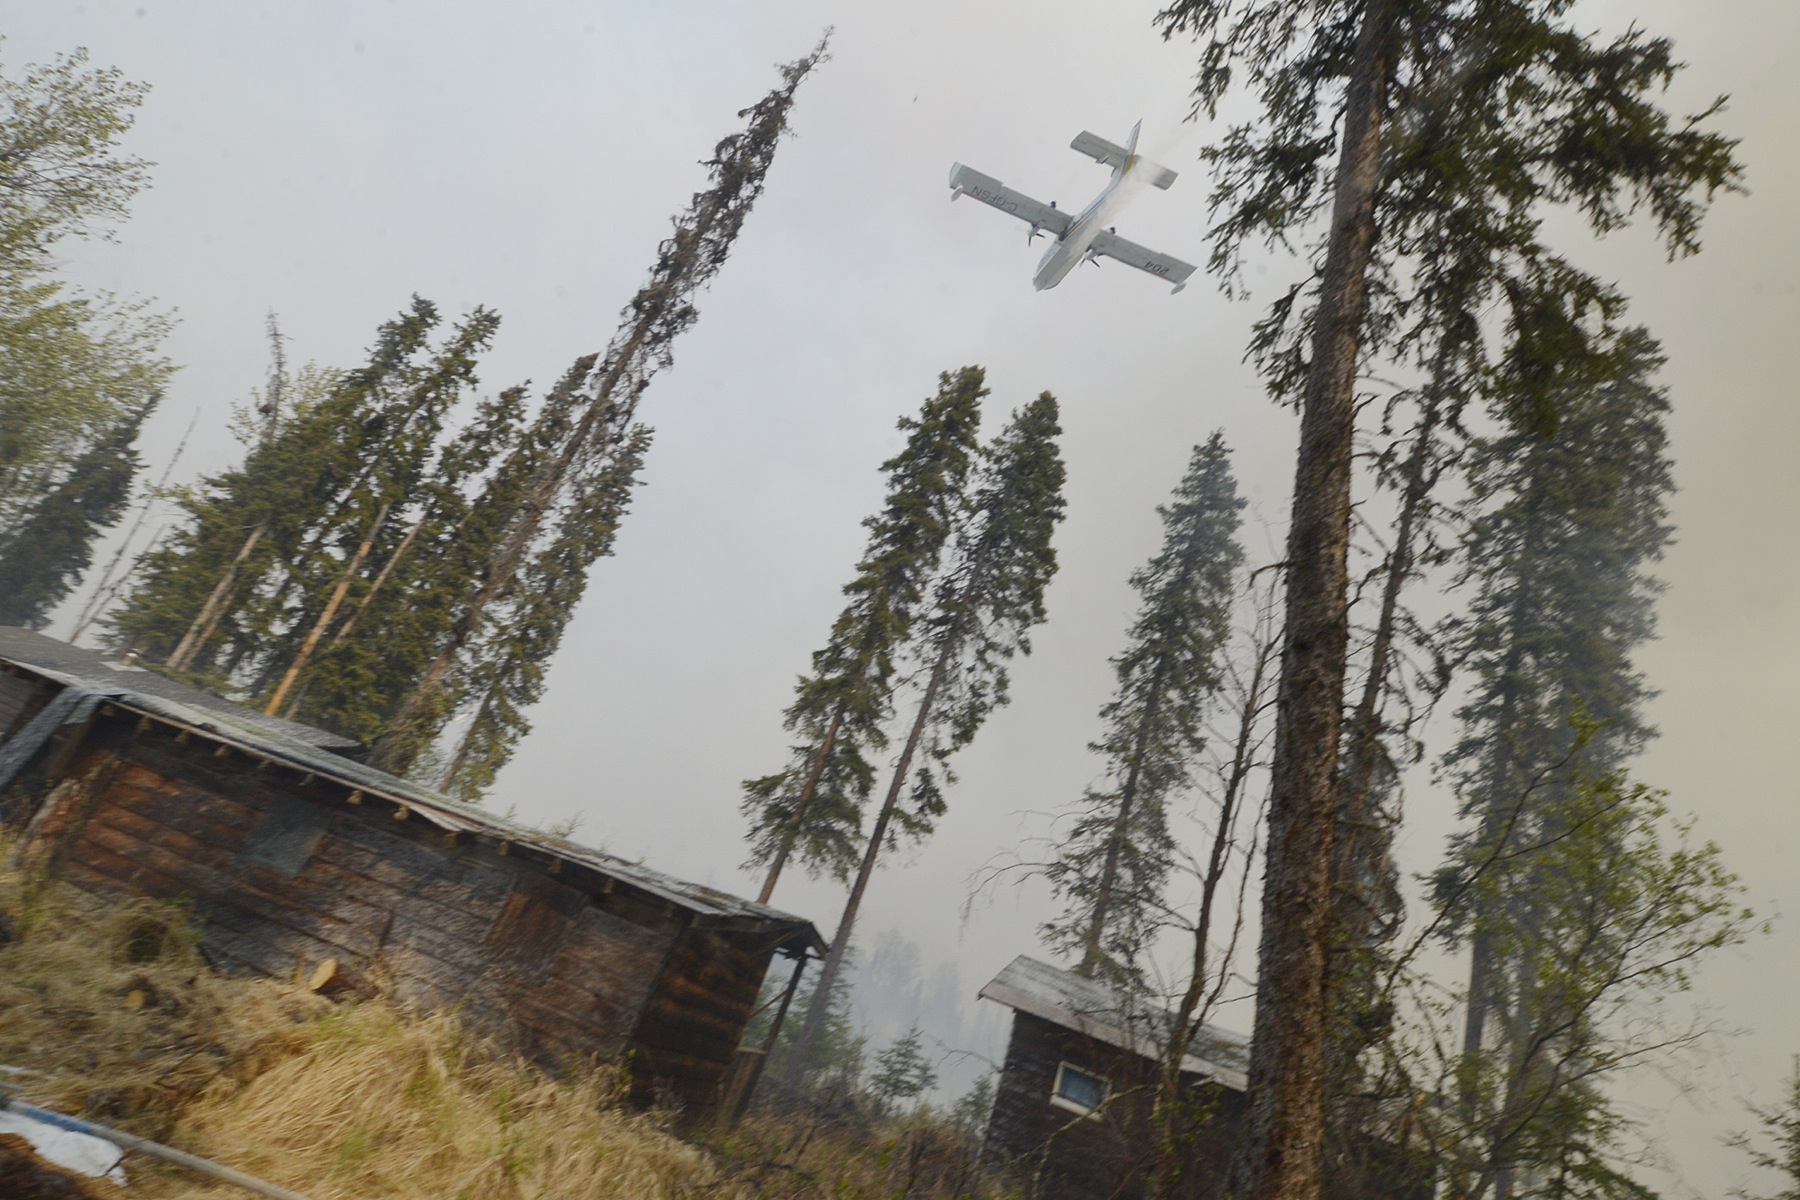 A plane sprays foam over a portion of the 156,041 acre Funny River Horse Trail wildfire Sunday May 25, 2014 in the Funny River community of Soldotna, Alaska. Several hundred homes were evacuated after the fire flared briefly over a fire break set up about one-quarter mile south of the community.-Photo by Rashah McChesney/Morris News Service-Peninsula Clarion